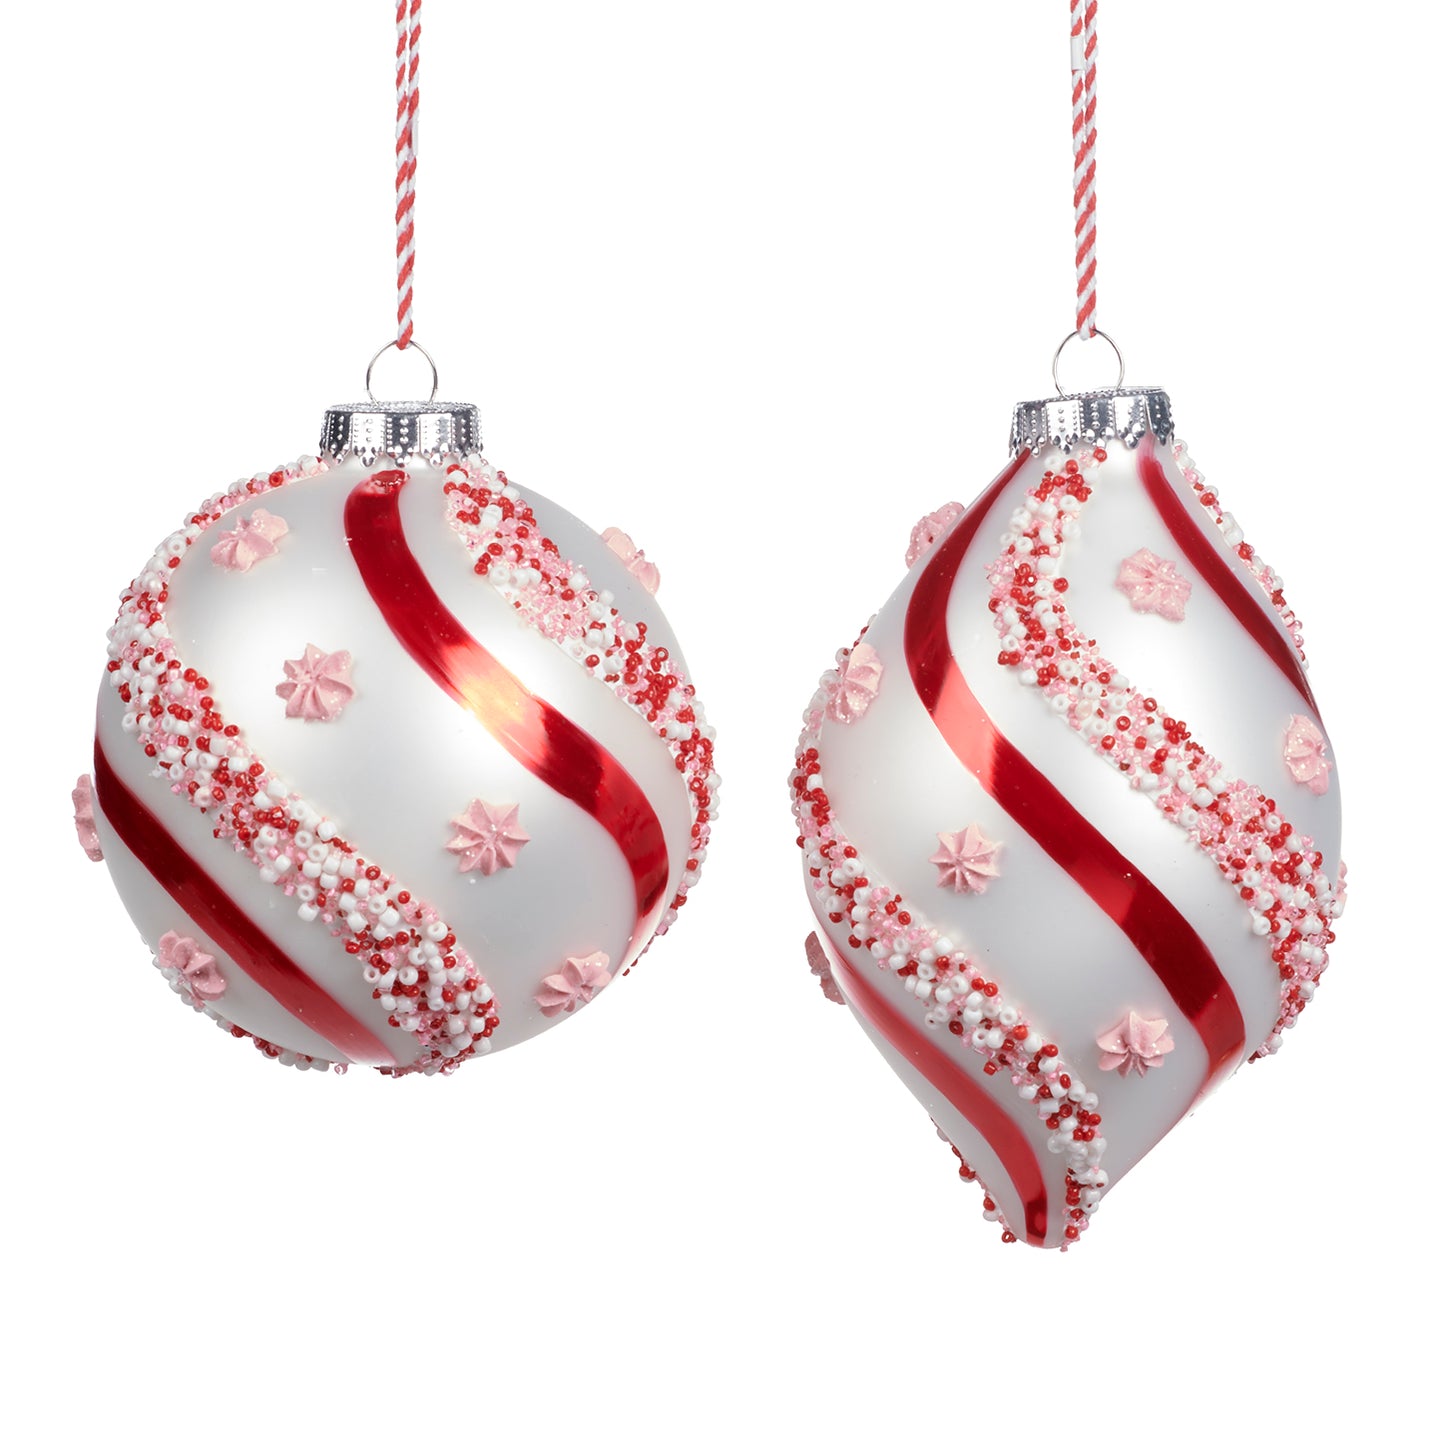 Glass Sprinkle Candy Ball/Finial Ornament White/Red 10Cm, Set Of 2, Assortment